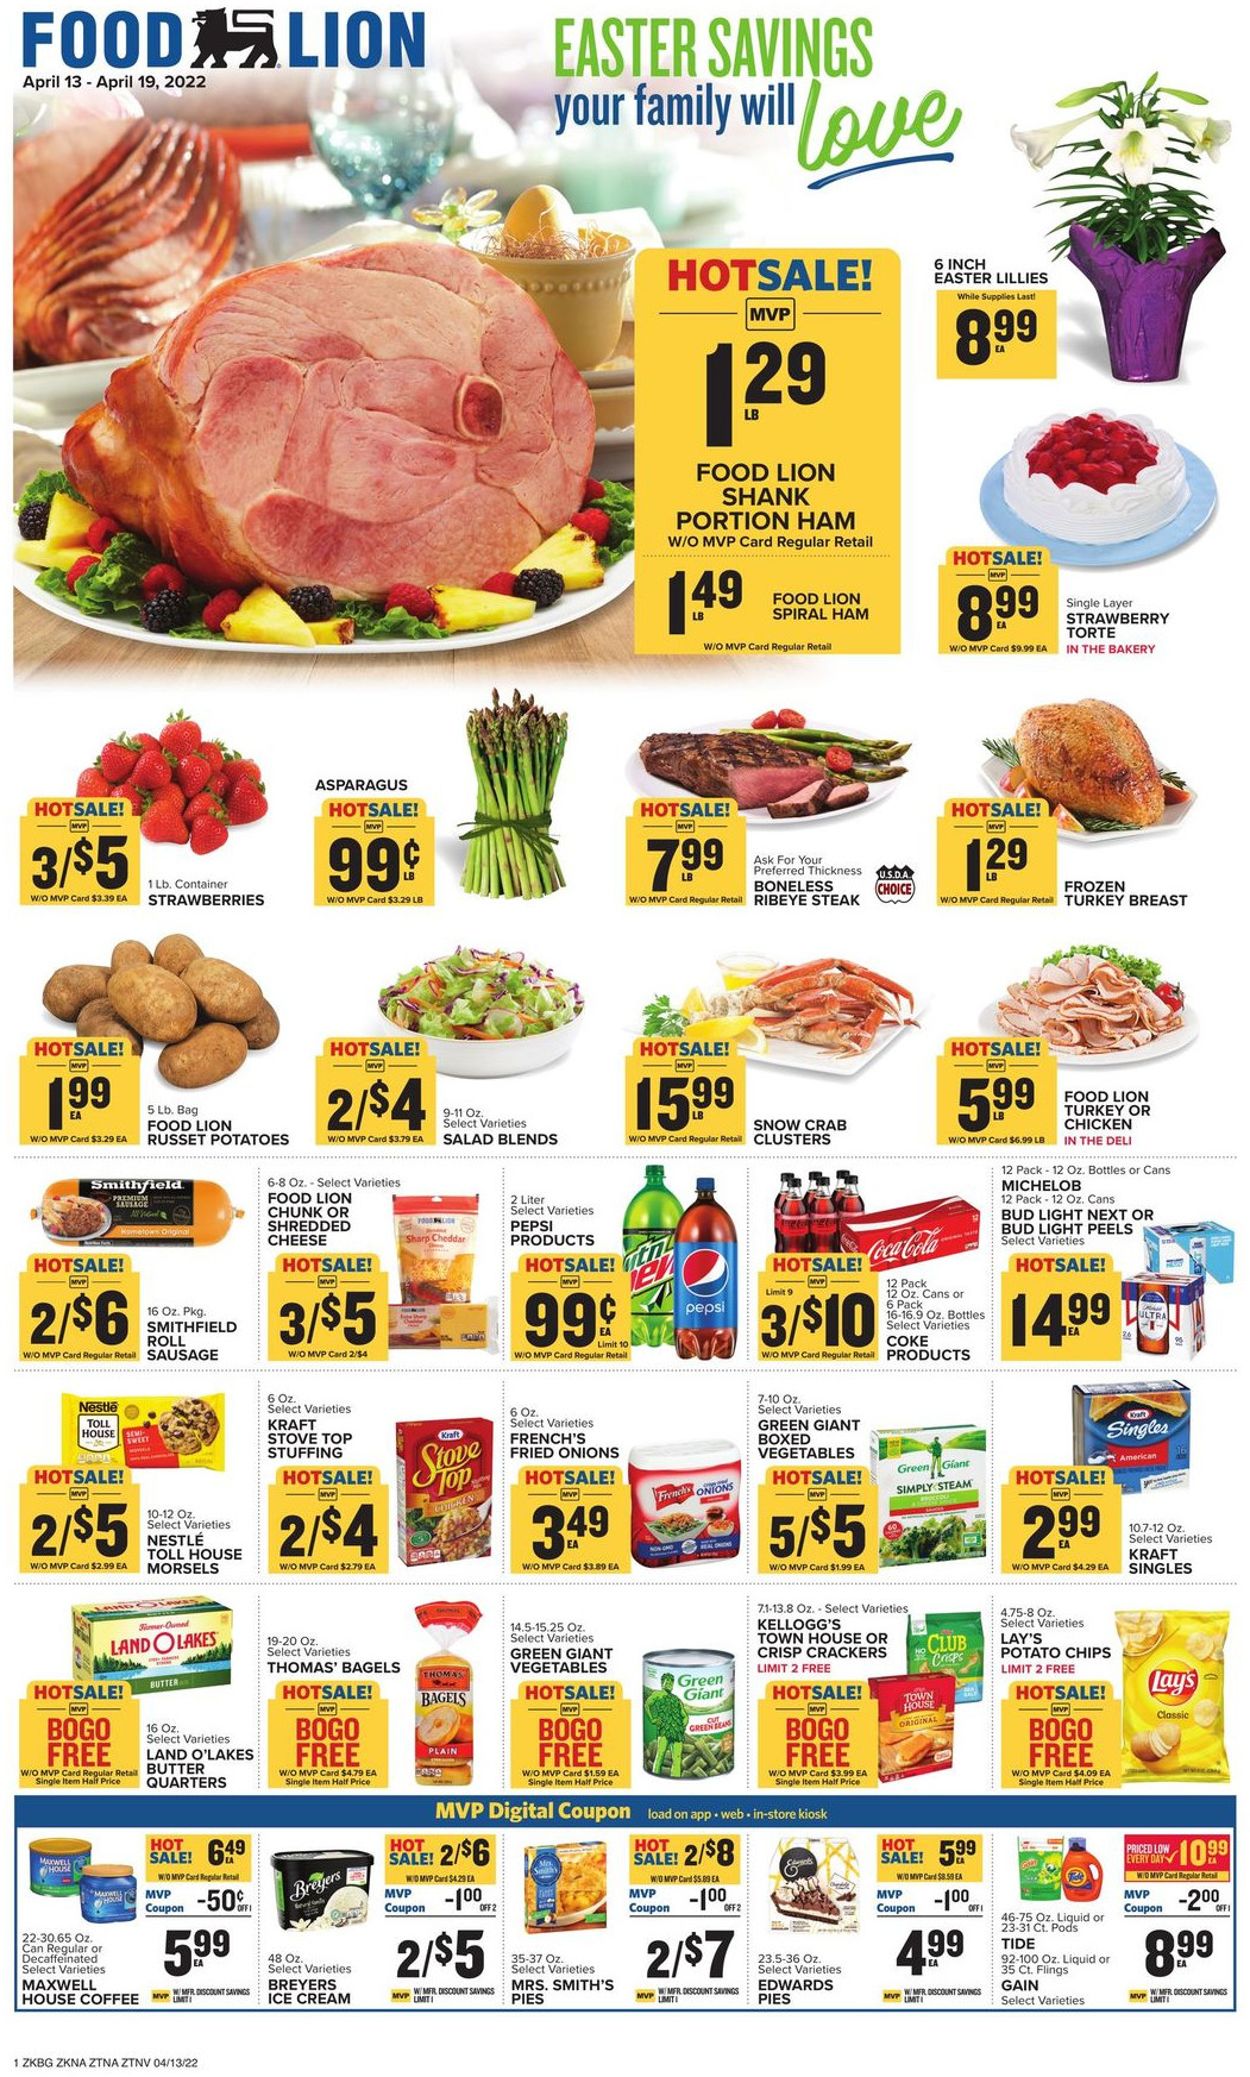 Food Lion EASTER 2022 Current weekly ad 04/13 04/19/2022 frequent